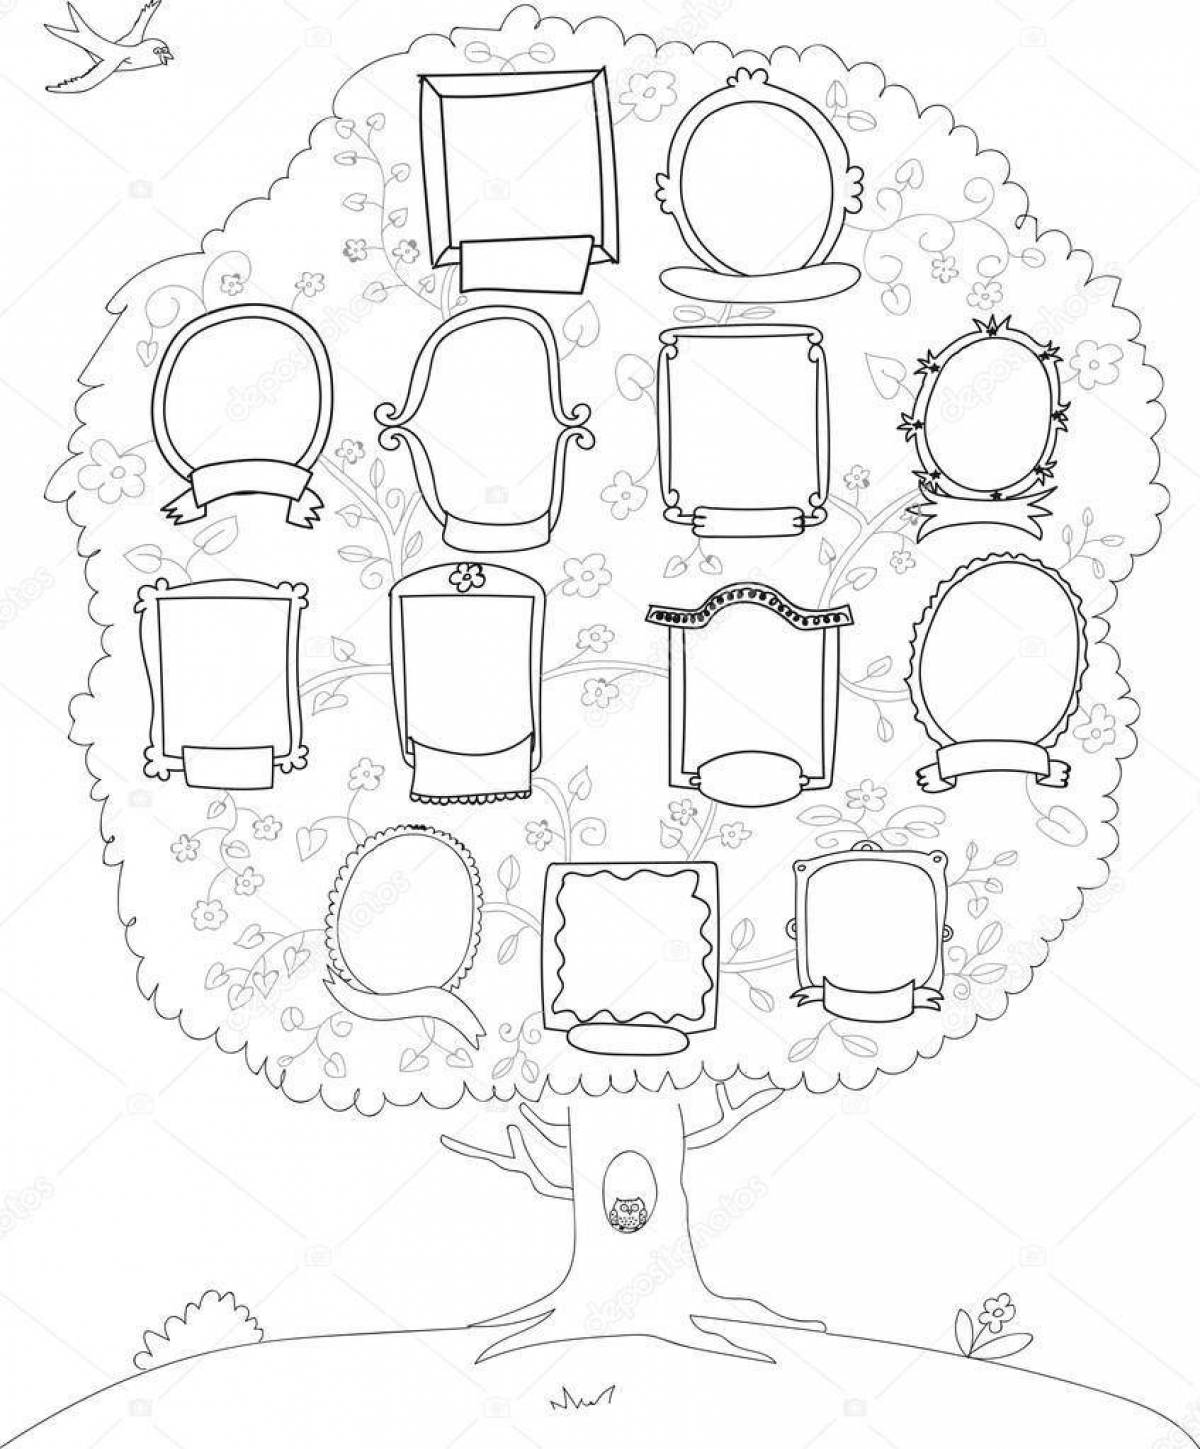 Nice coloring tree template